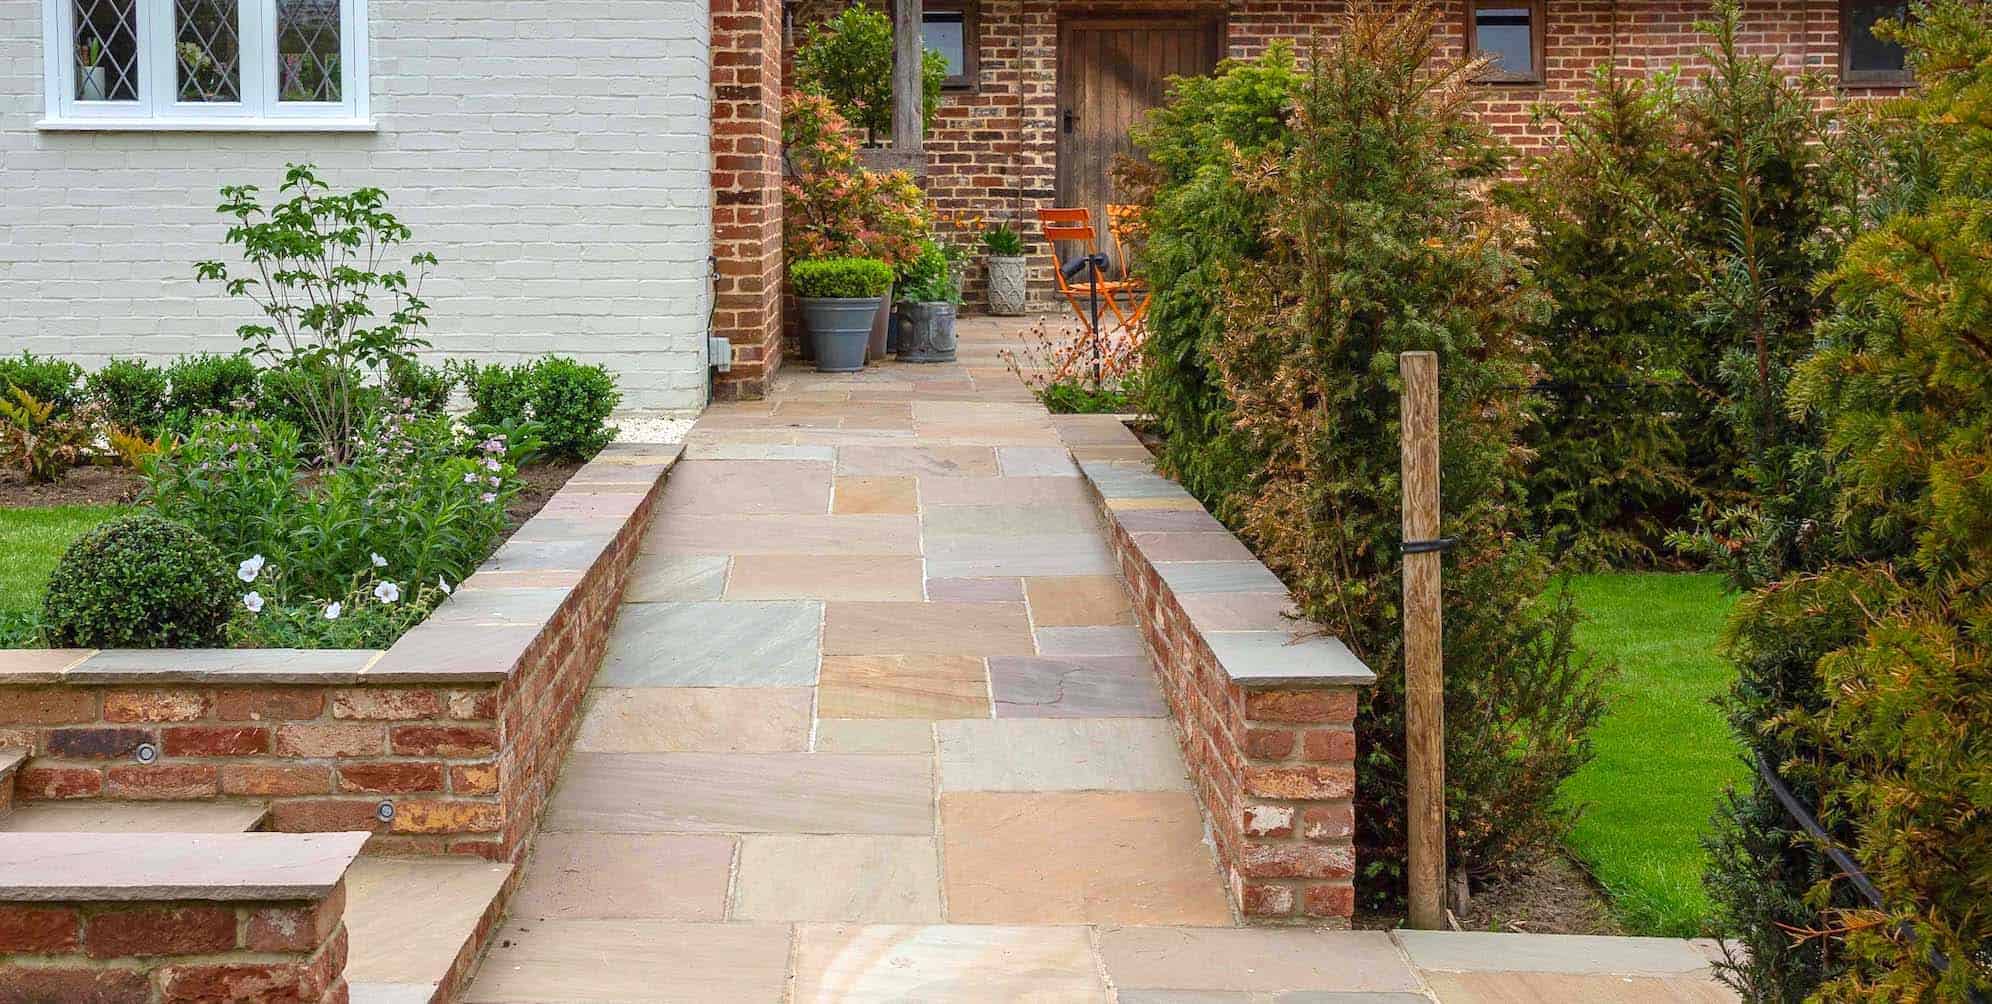 hard landscapers west sussex and surrey showing natural colour paving slabs